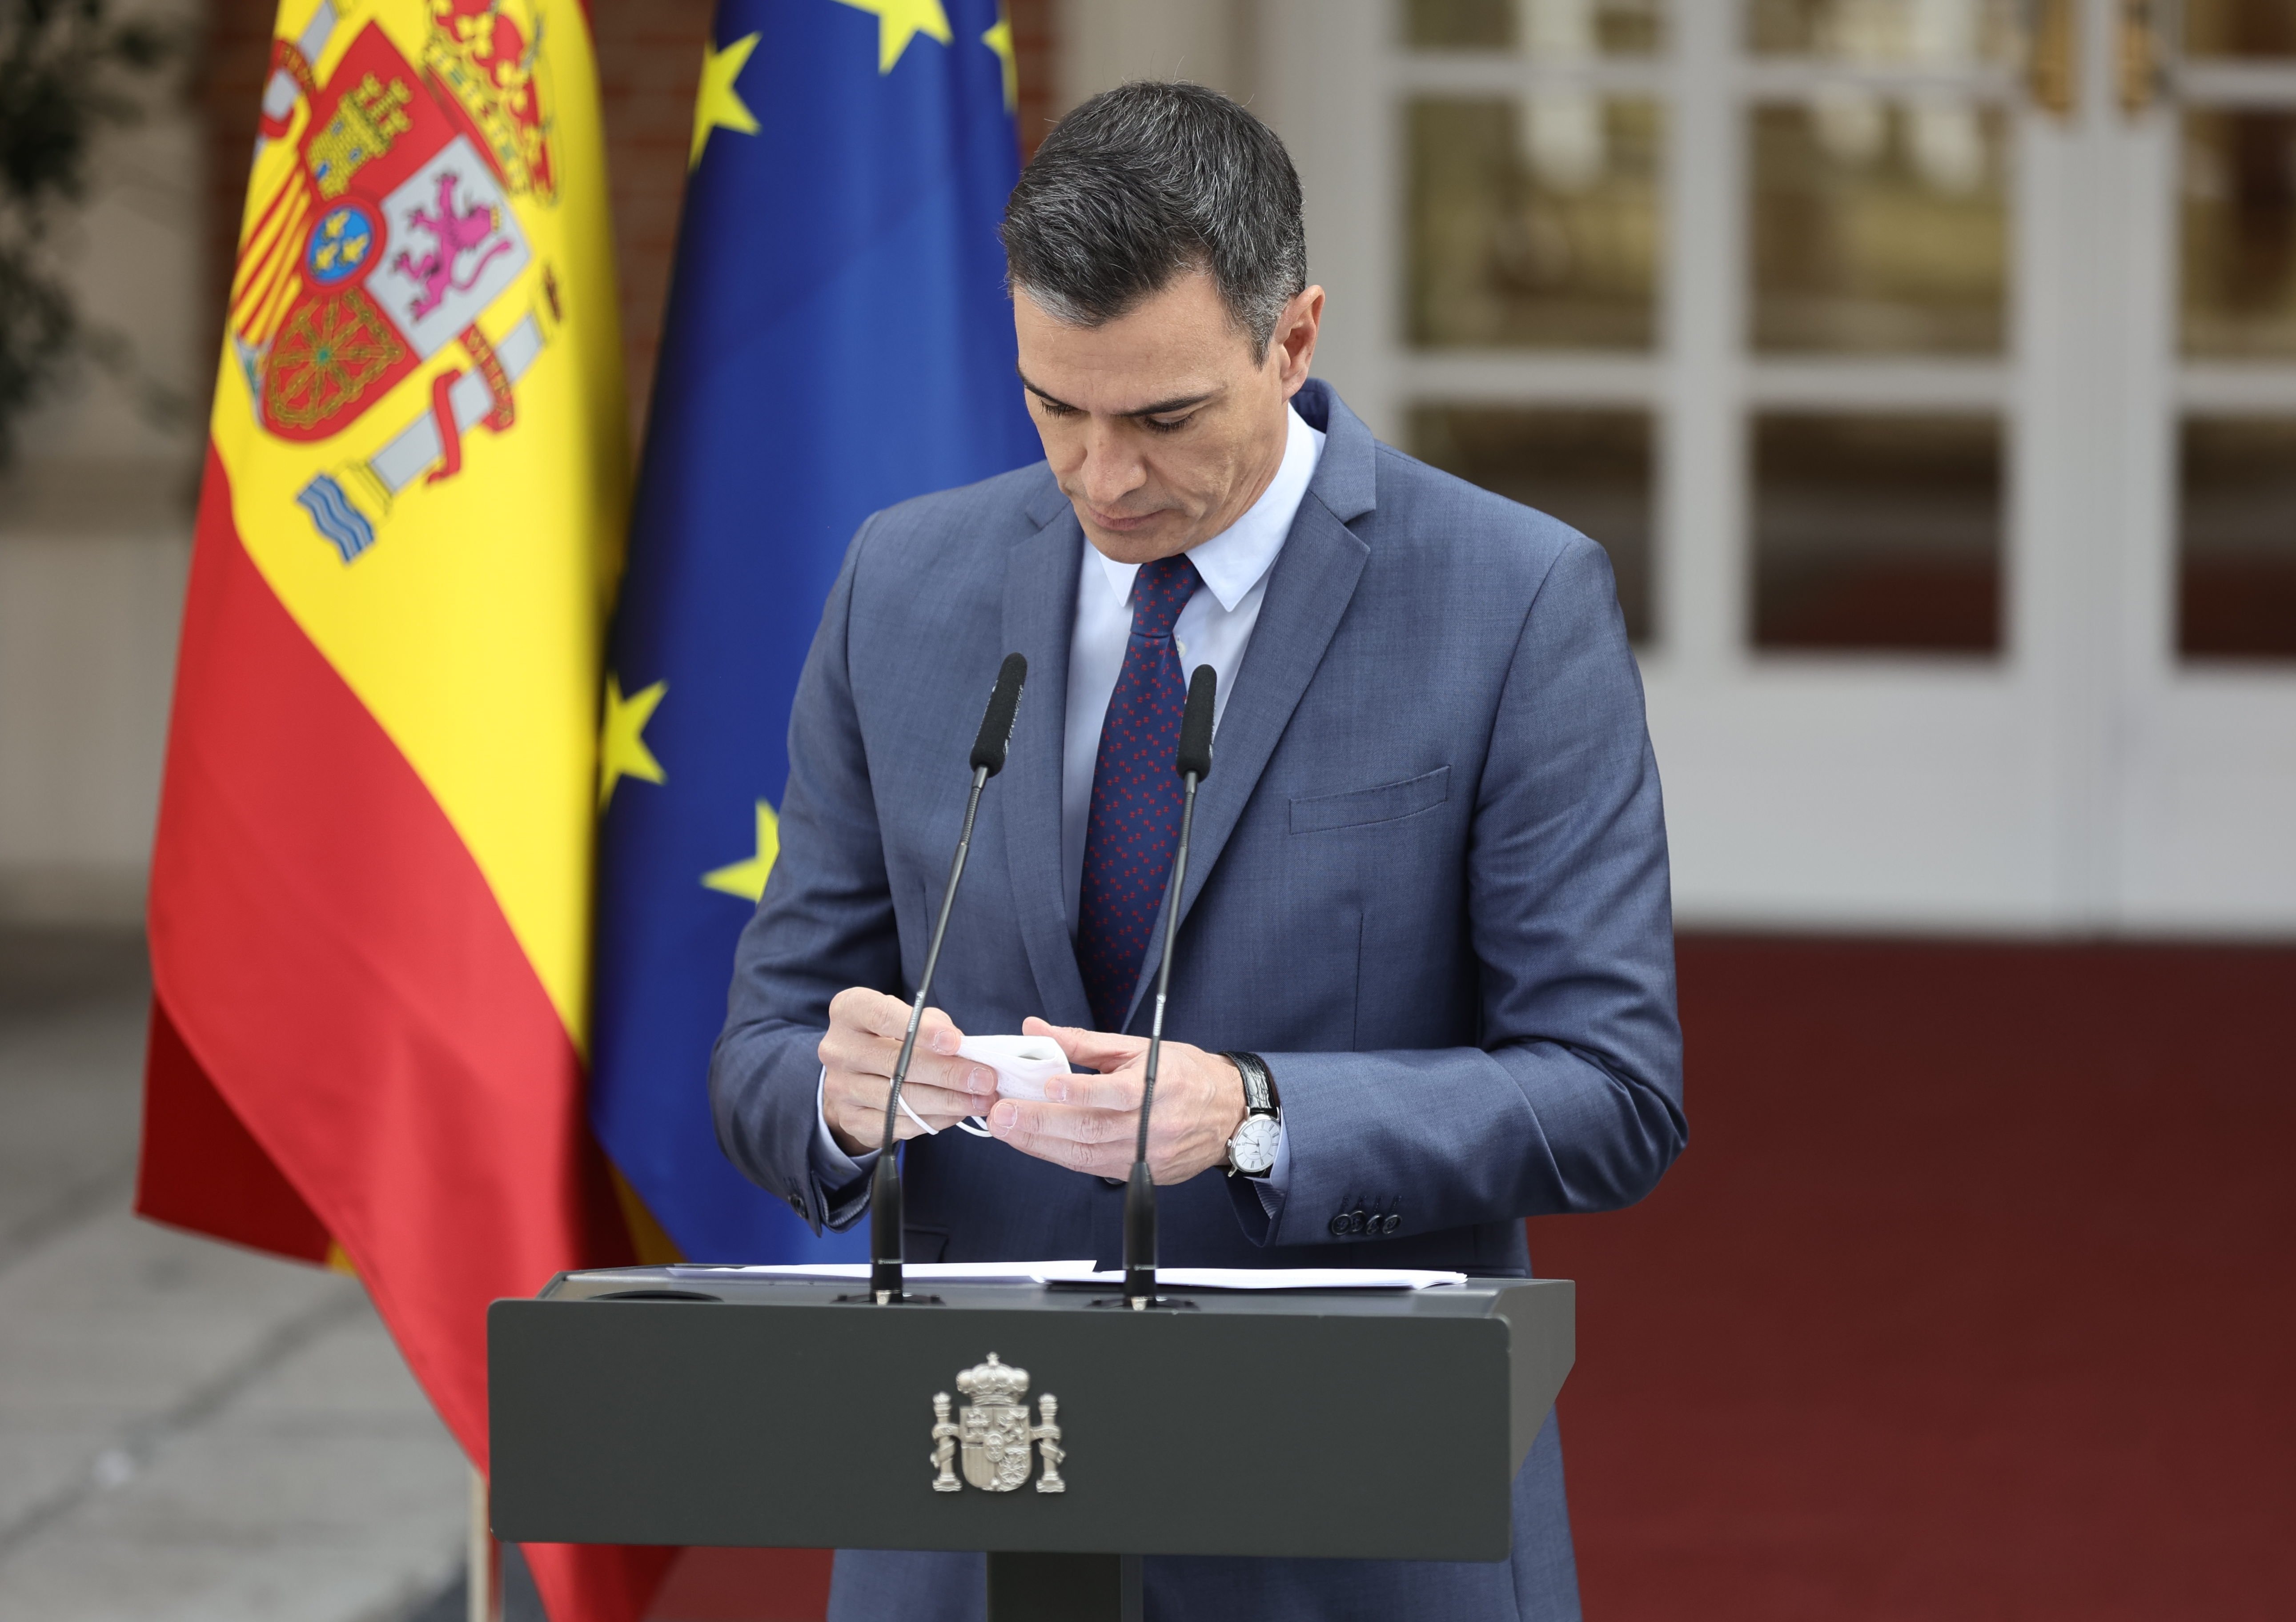 Pedro Sánchez calls a snap general election in Spain for July 23rd after local election losses